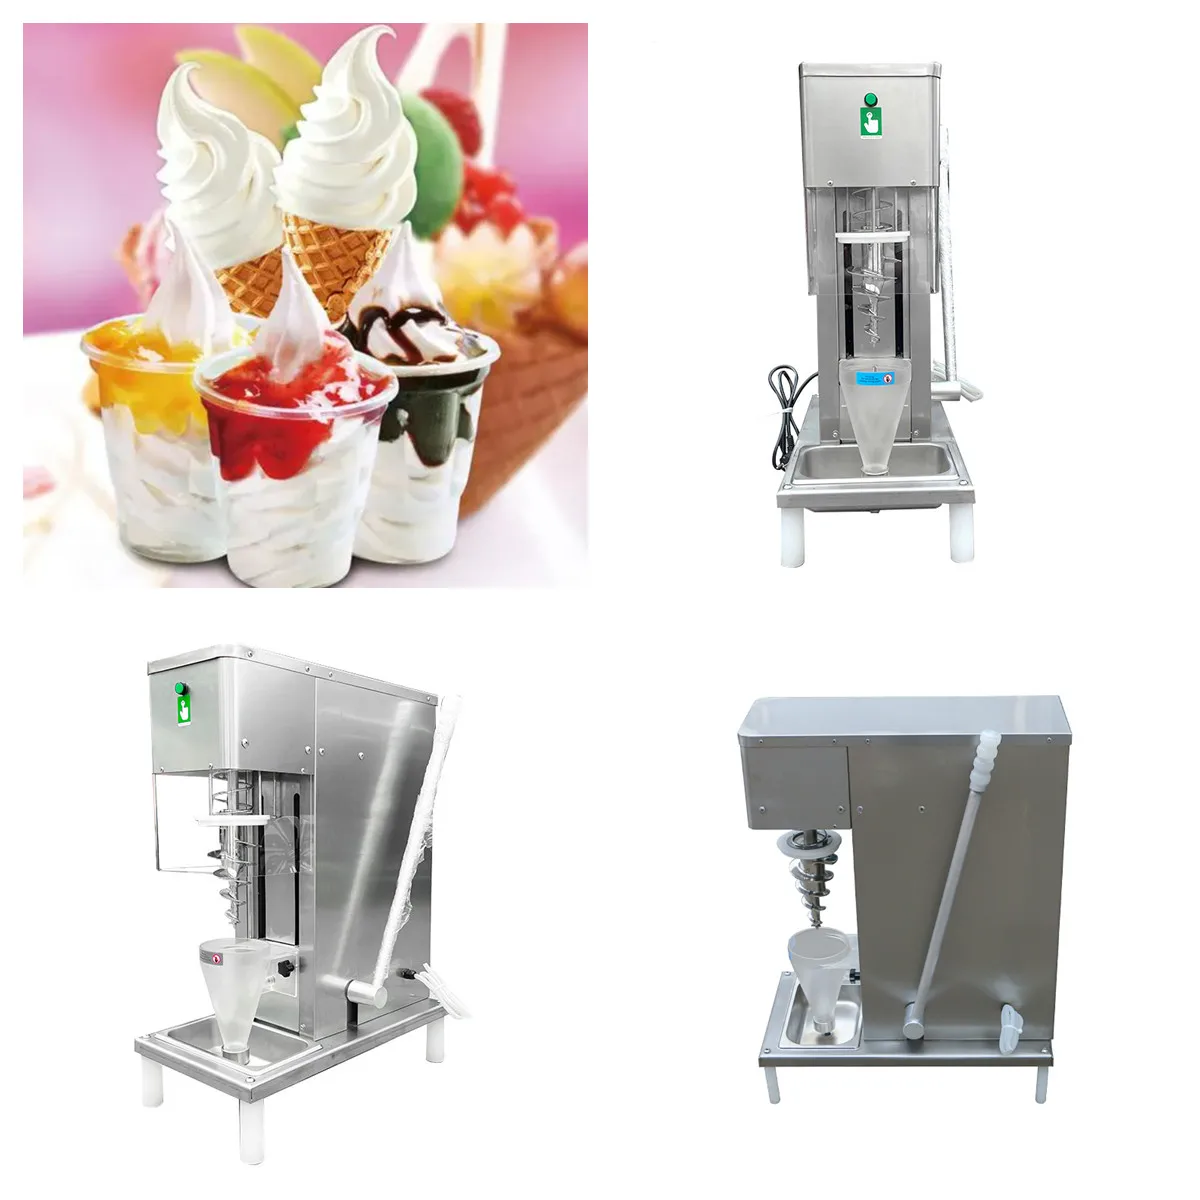 Professional Commercial Fruit Ice Cream Blender Machine With Manual Control Soft Serve Swirl Fruit Nut Yogurt Ice Cream Maker professional volleyball aid training equipment adjustable volleyball solo practice arm swing serve practice trainer accessories